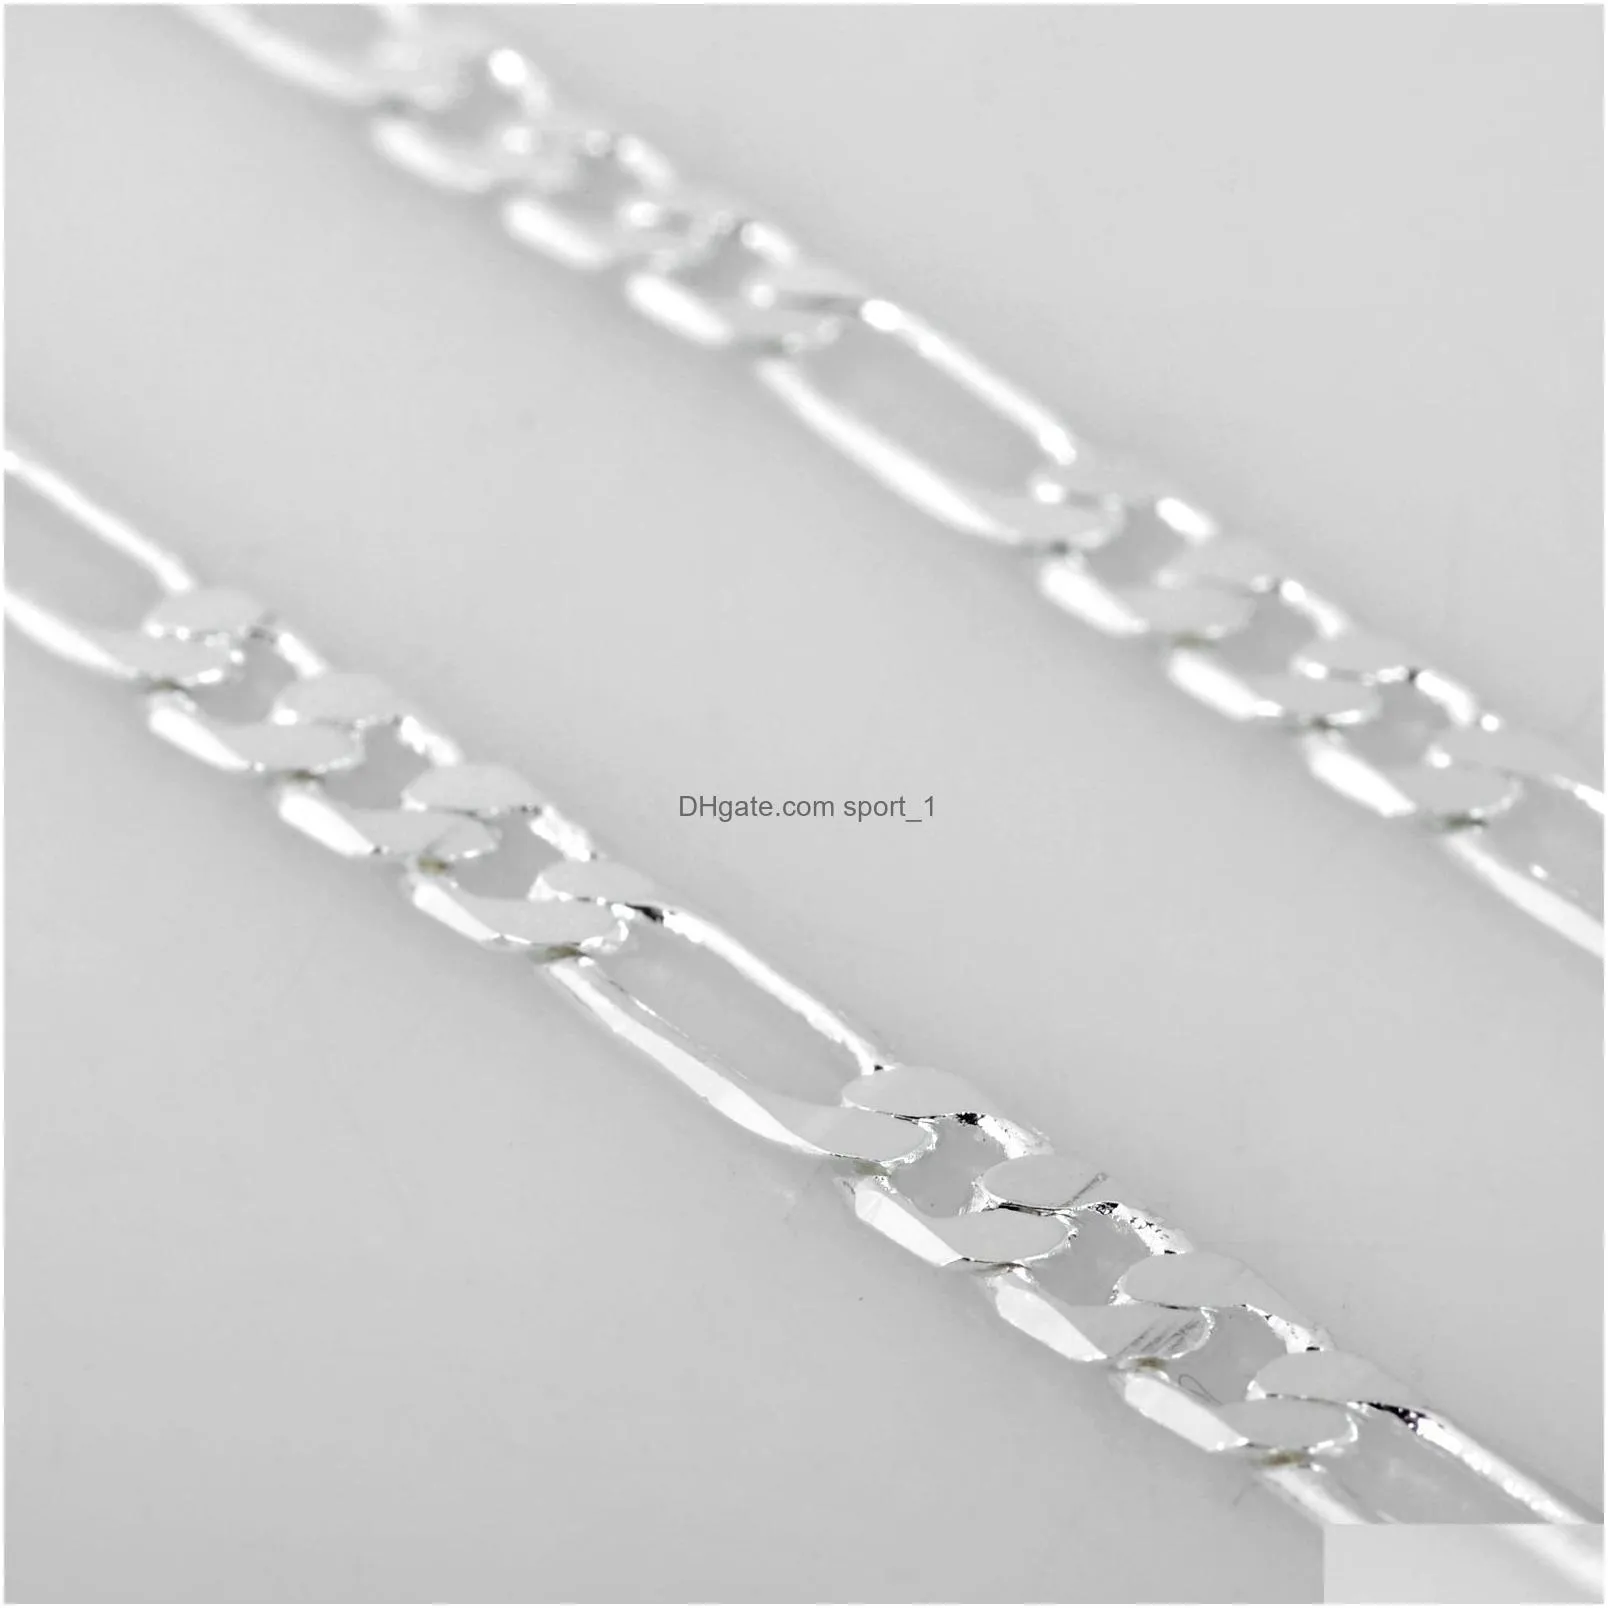 2mm silver plated chain necklace for women men fashion gold colors choker chains fit pendant jewelry 16-30 inches